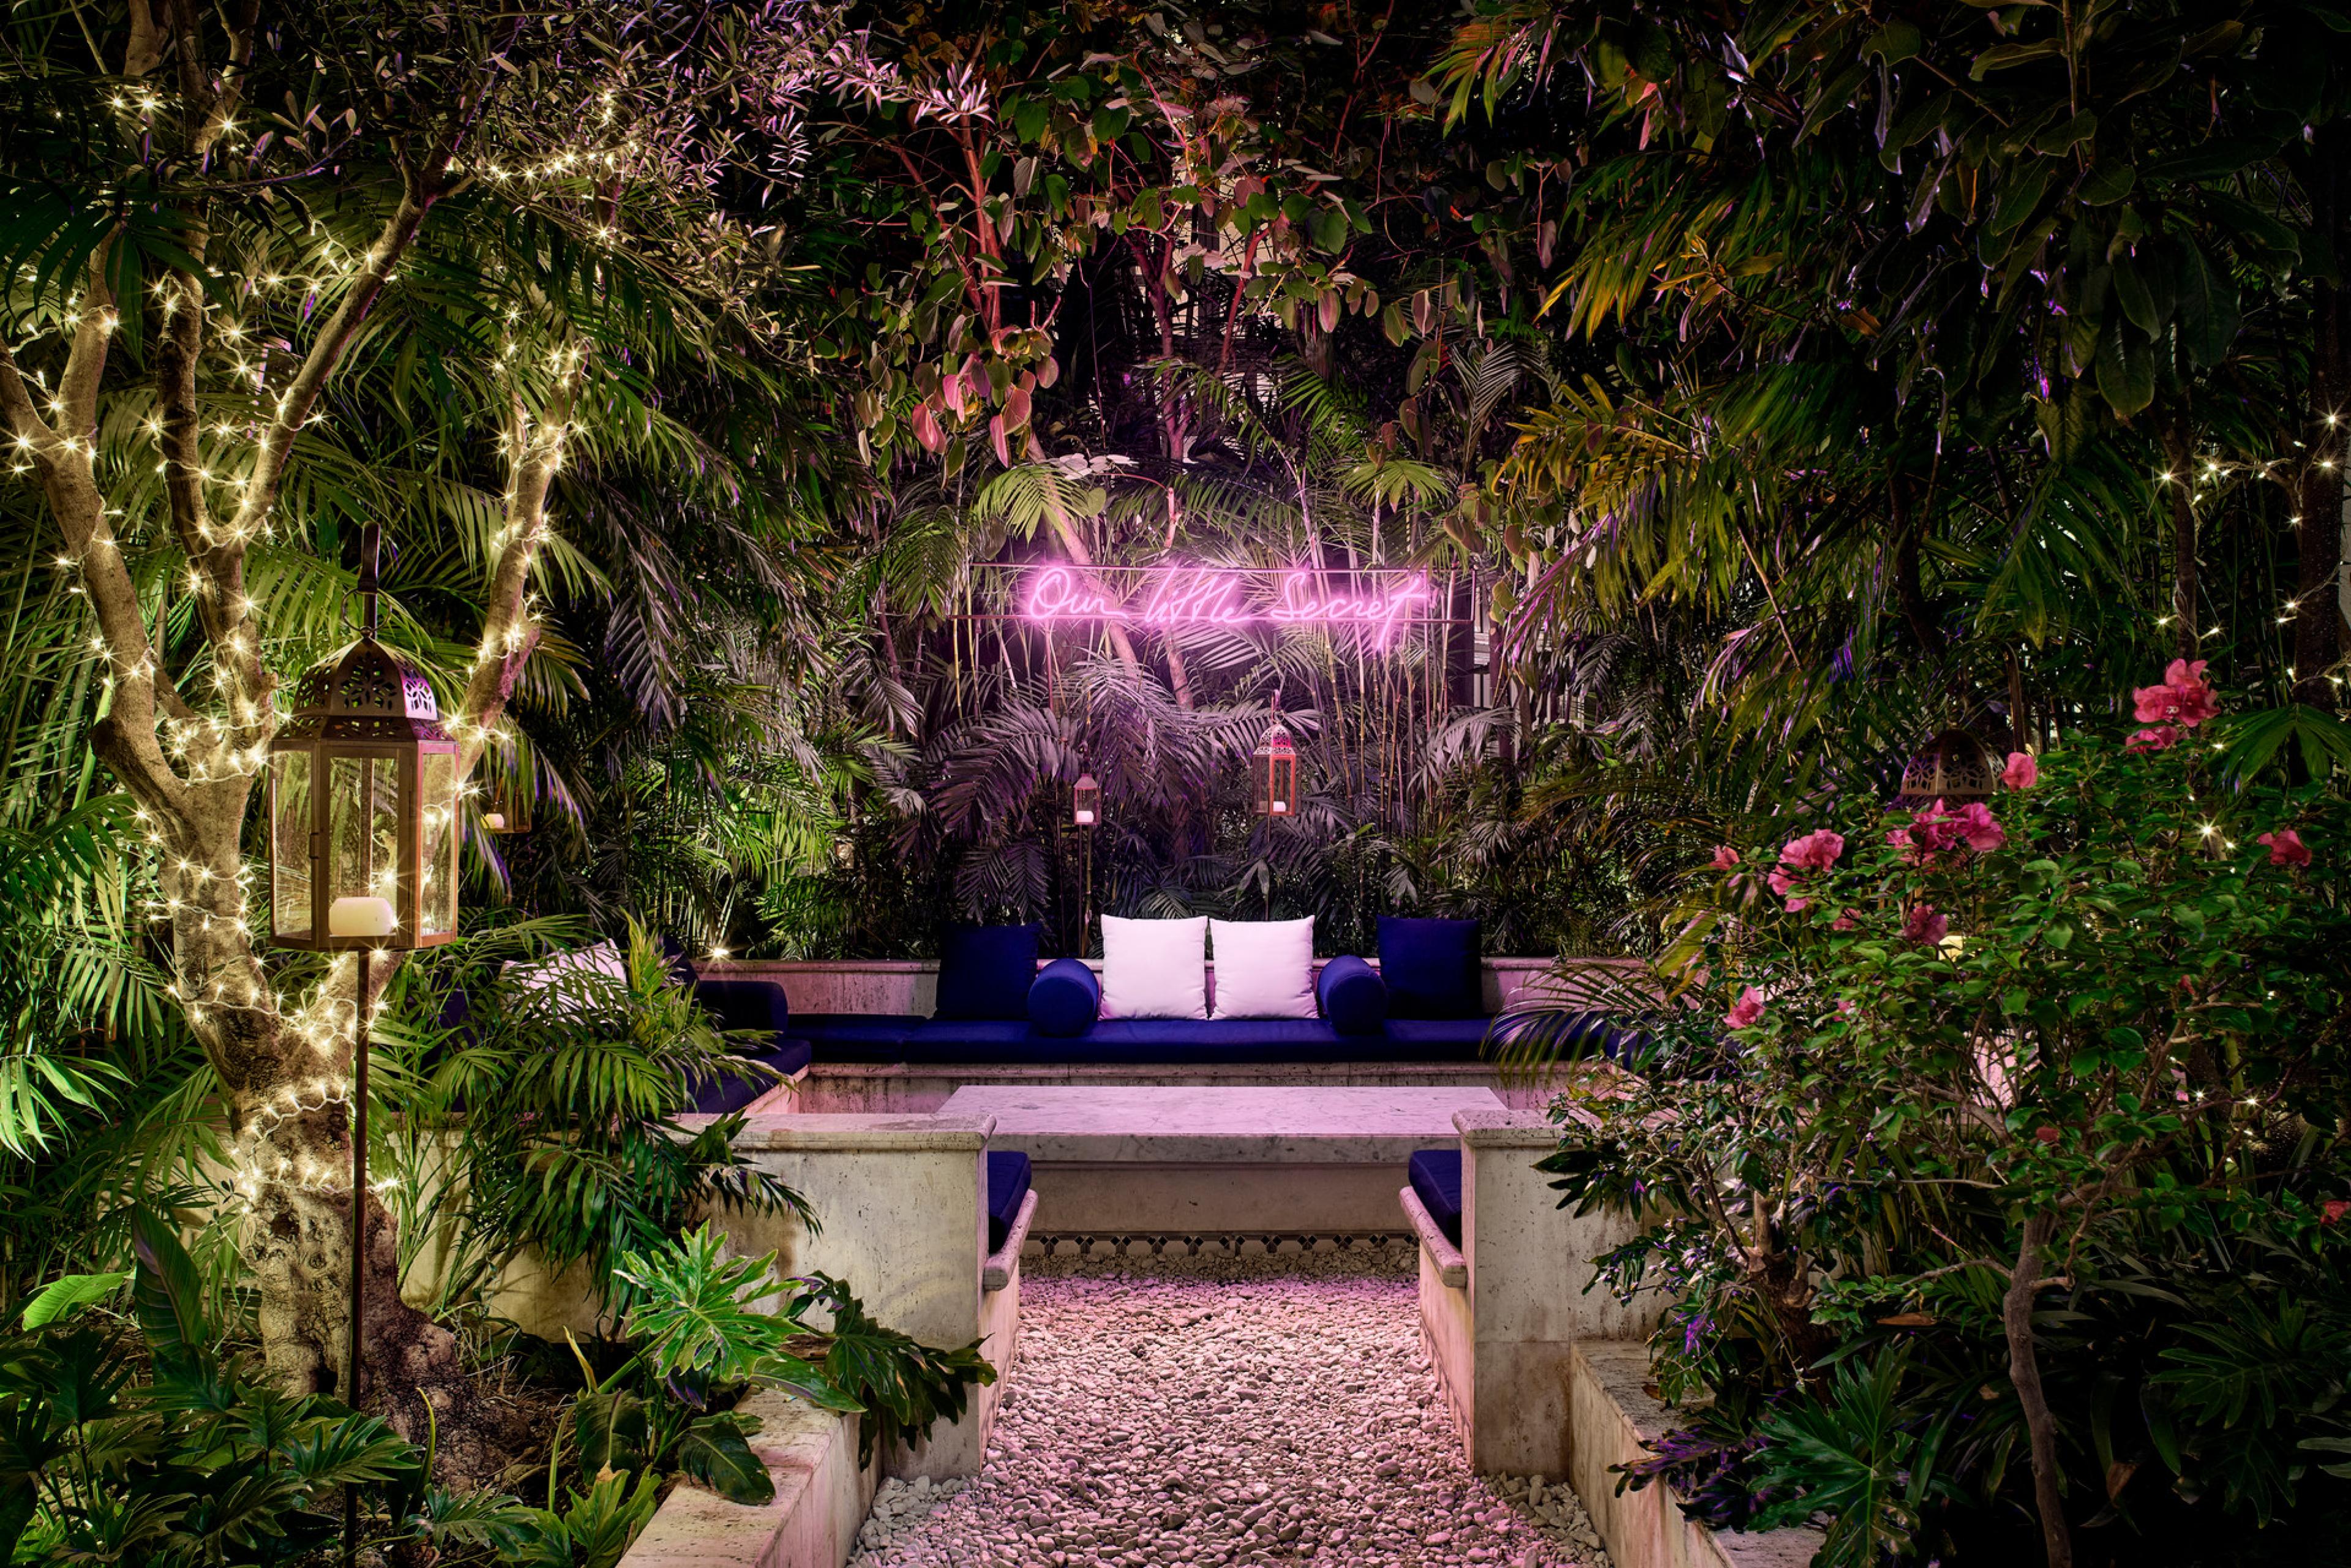 A small outdoor bench seat surrounded by lush greenery with a neon sign that reads "our little secret"